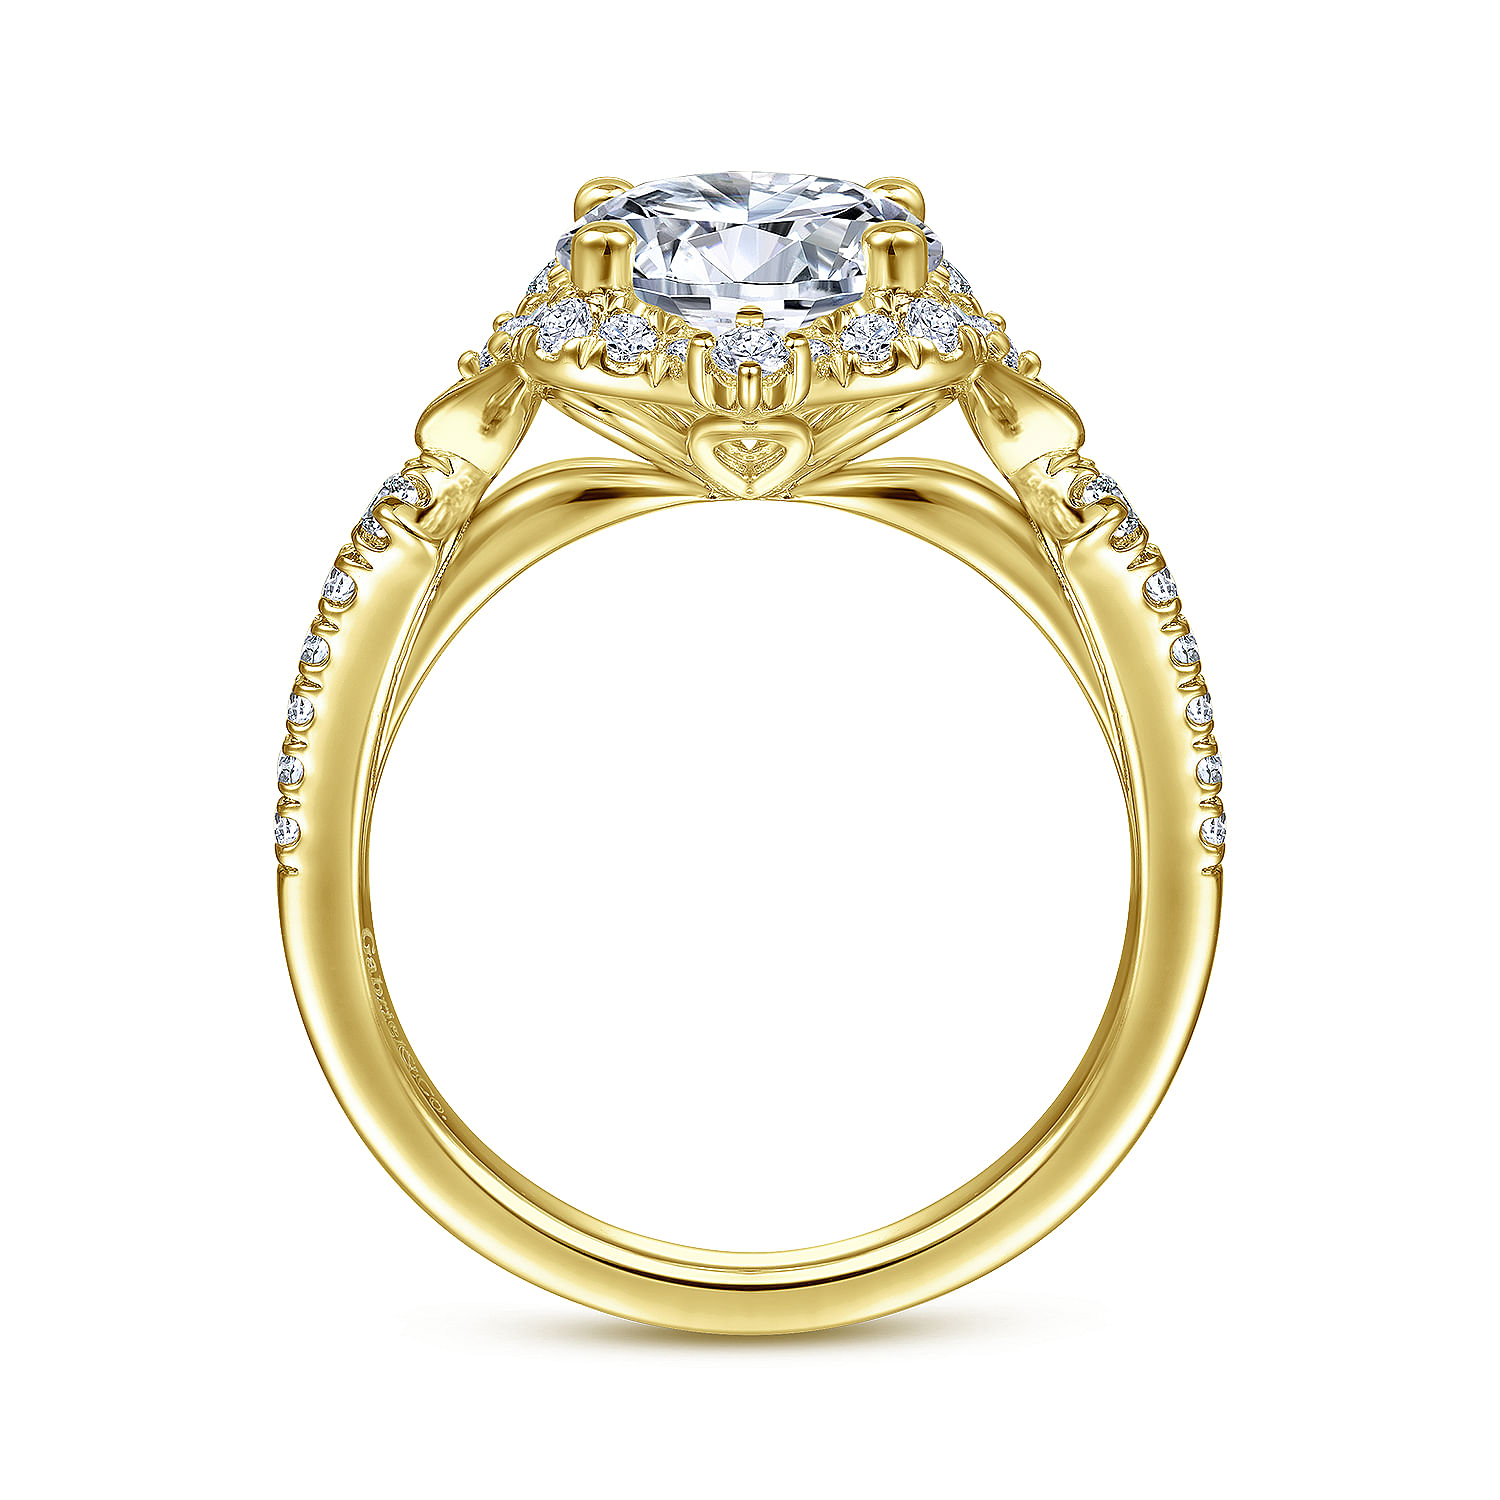 Unique 14K Yellow Gold Vintage Inspired Halo Diamond Engagement Ring